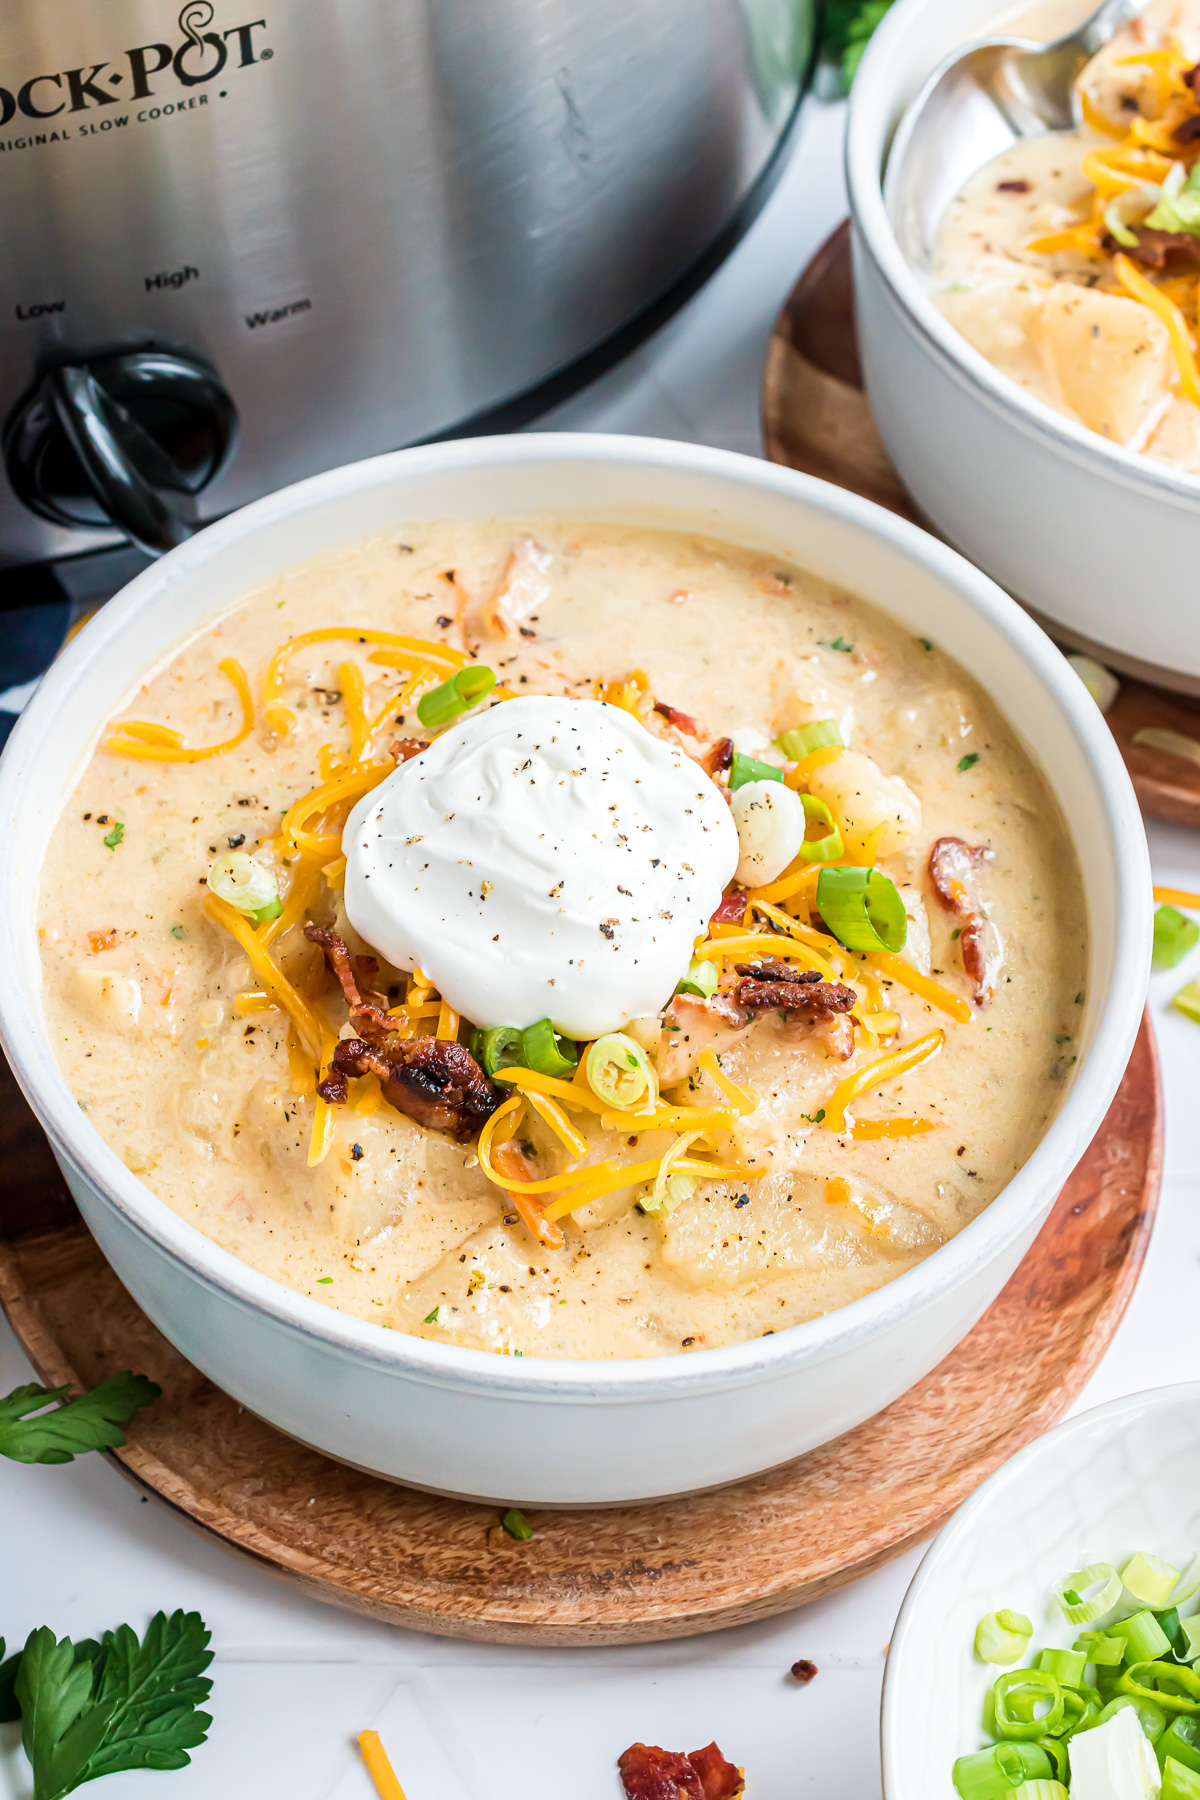 A bowl of loaded baked potato soup sitting on a wooden saucer topped with sour cream and ground black pepper.